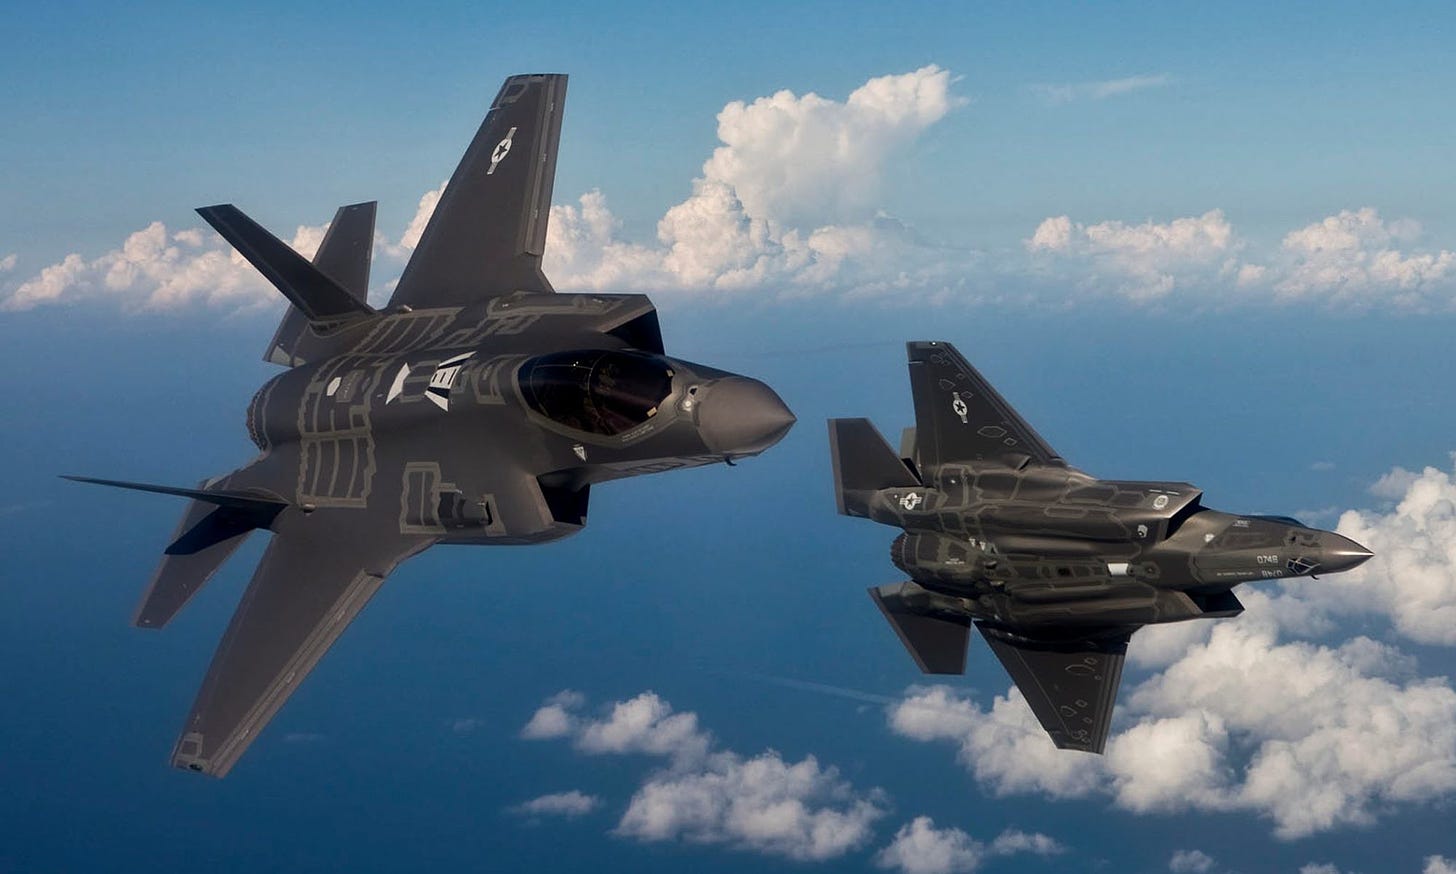 Two F 35 figher jets roll away from each other in the sky